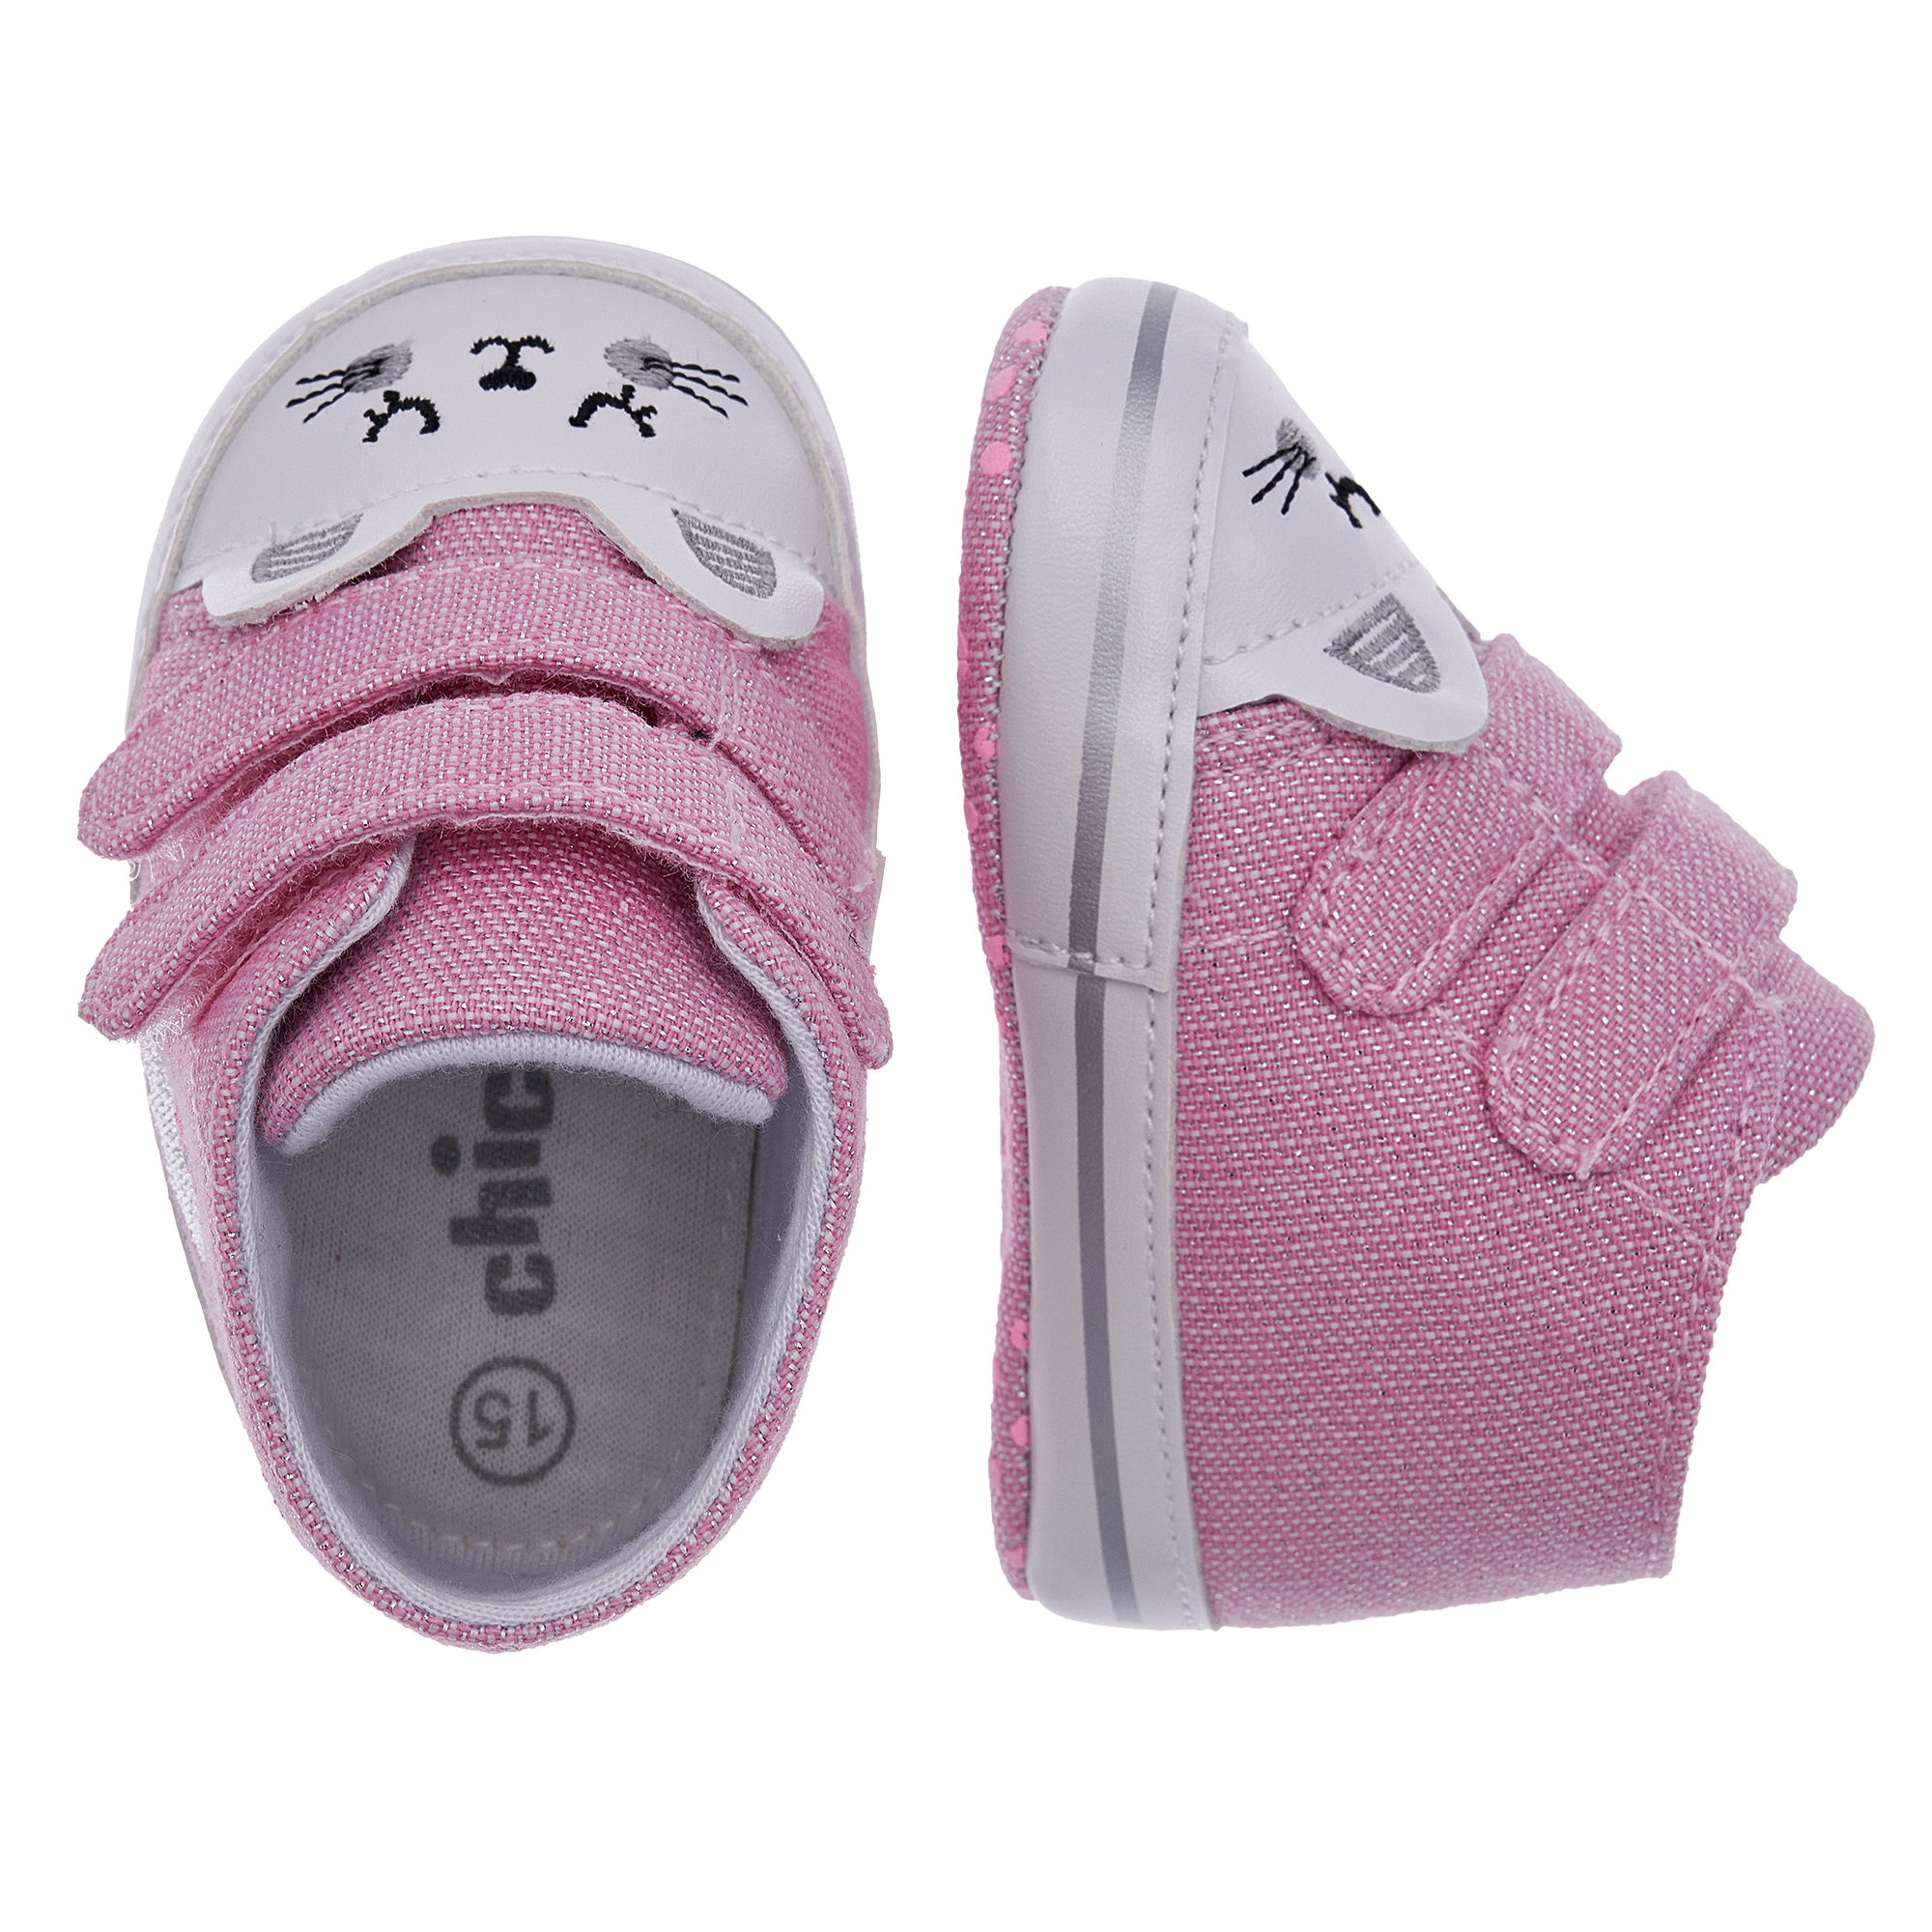 Chicco sneaker nolly - Chicco